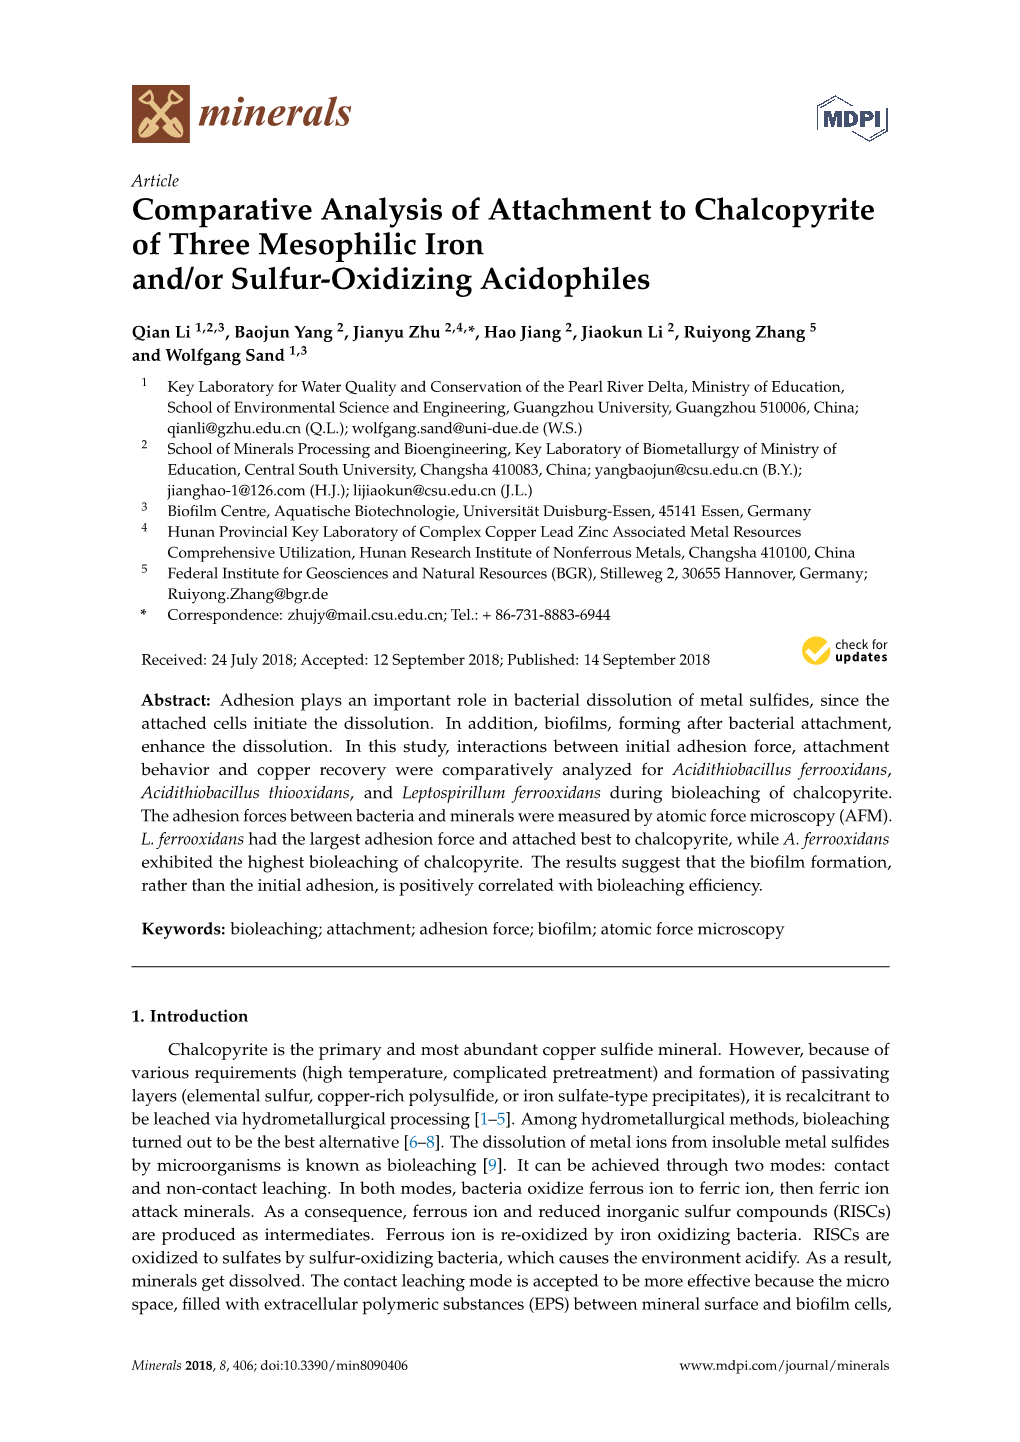 Comparative Analysis of Attachment to Chalcopyrite of Three Mesophilic Iron And/Or Sulfur-Oxidizing Acidophiles